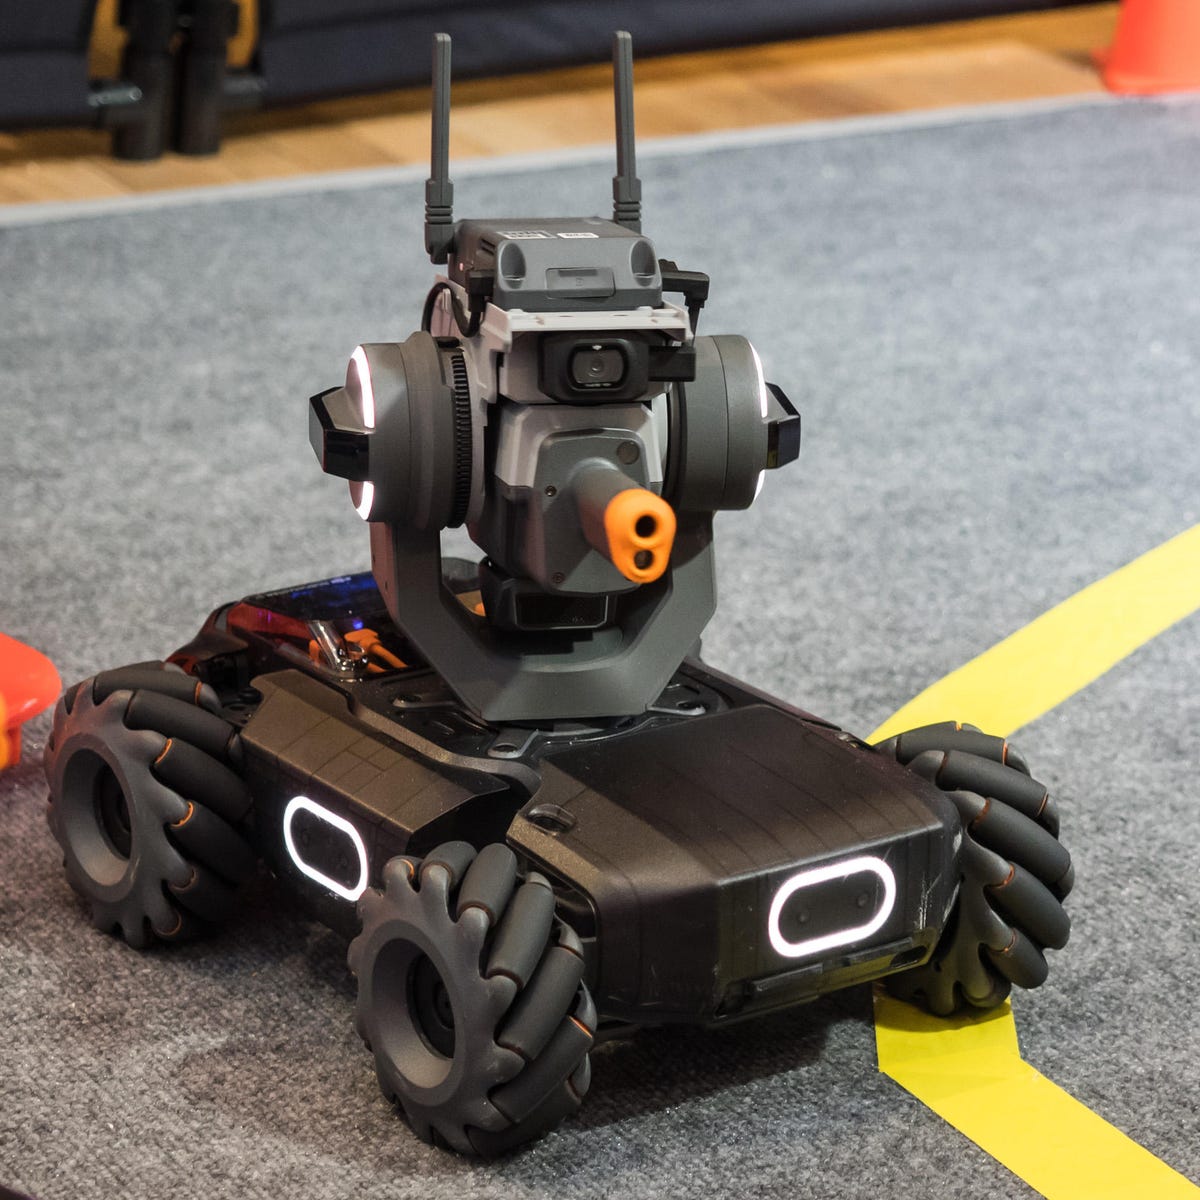 DJI's new $500 RC robot features a camera, 31 sensors and a mini cannon -  CNET